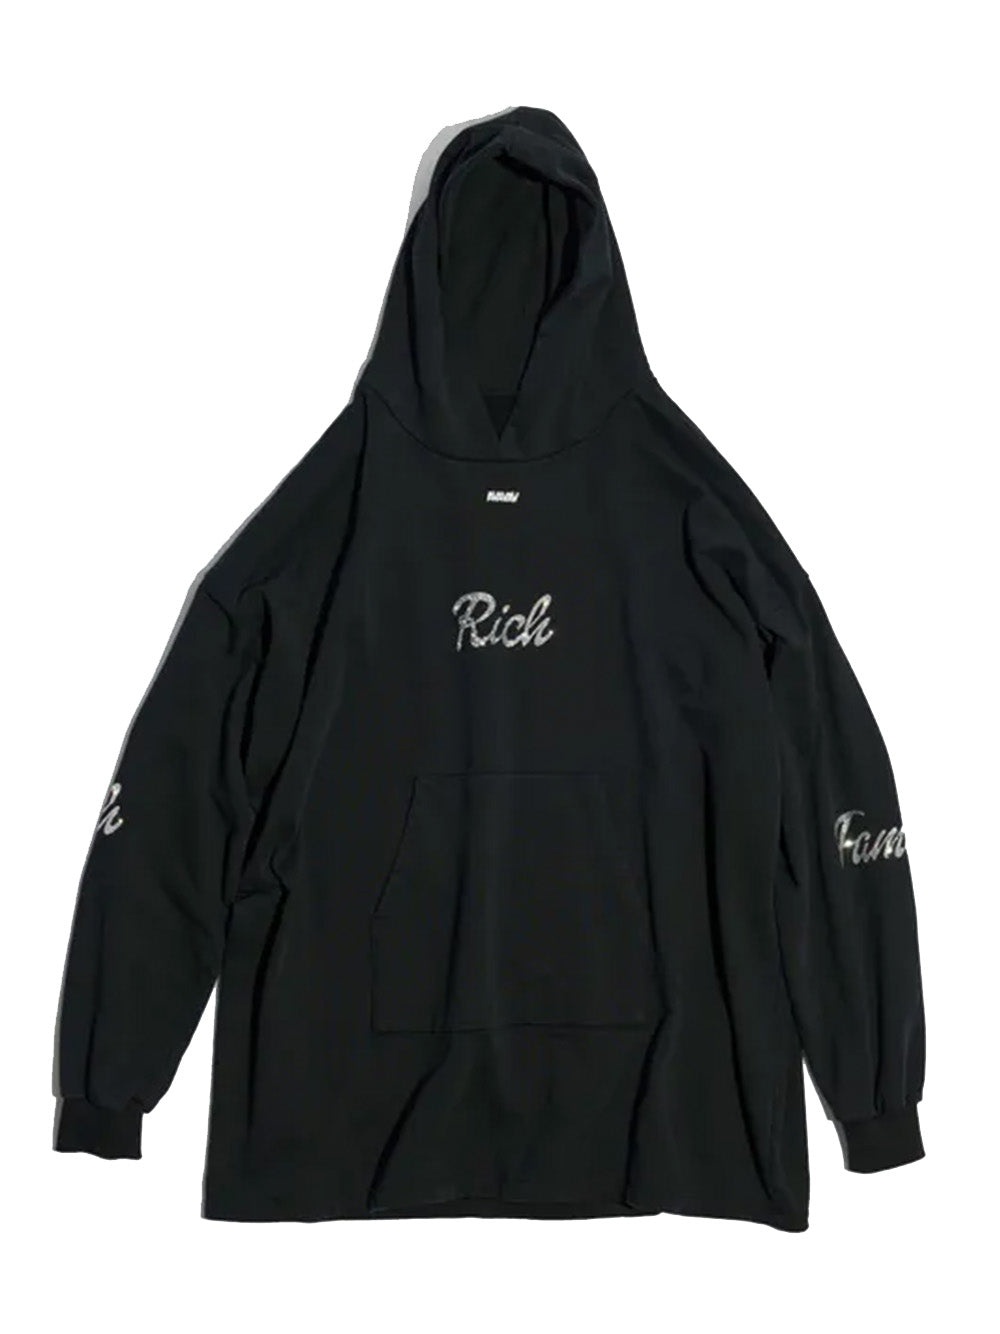 Hot Rich Famous Hoodie - 1